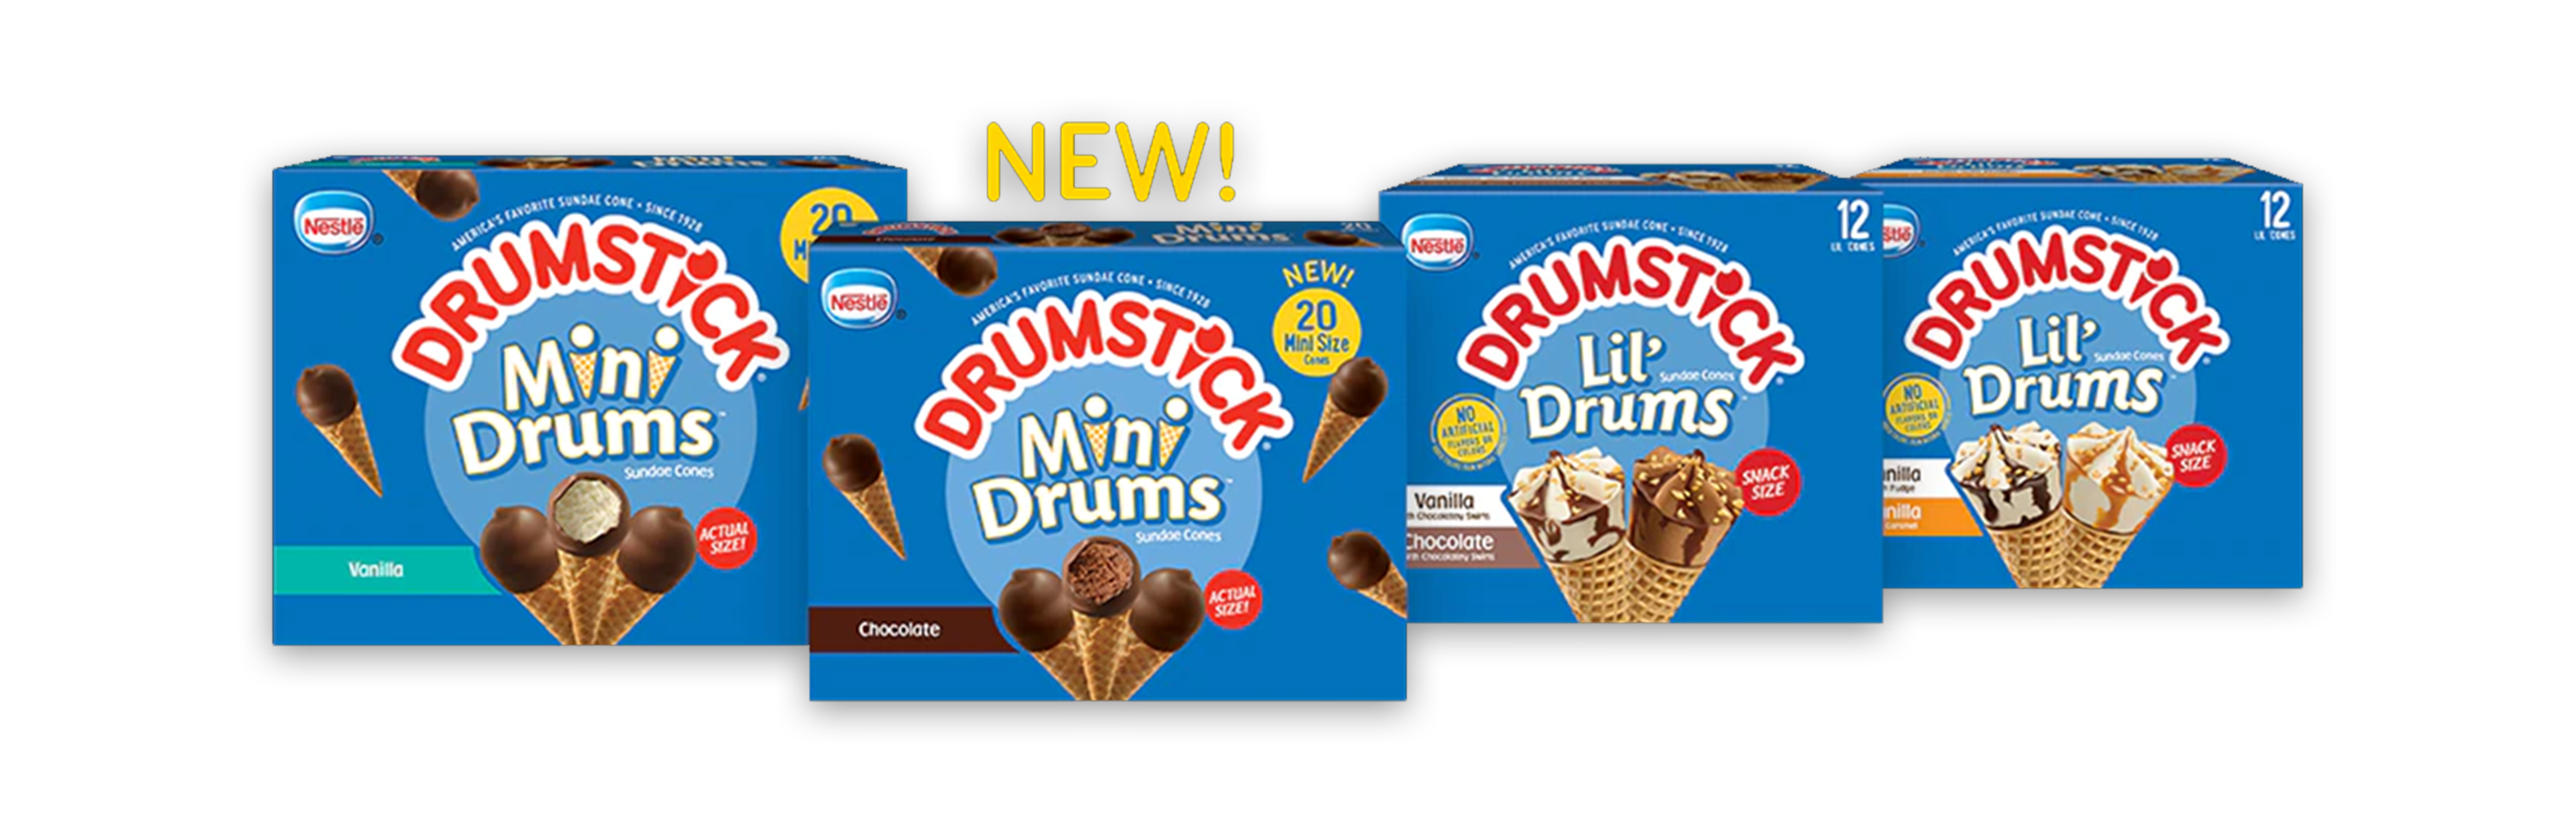 Drumstick Mini Drums and Lil' Drums in retail packaging.